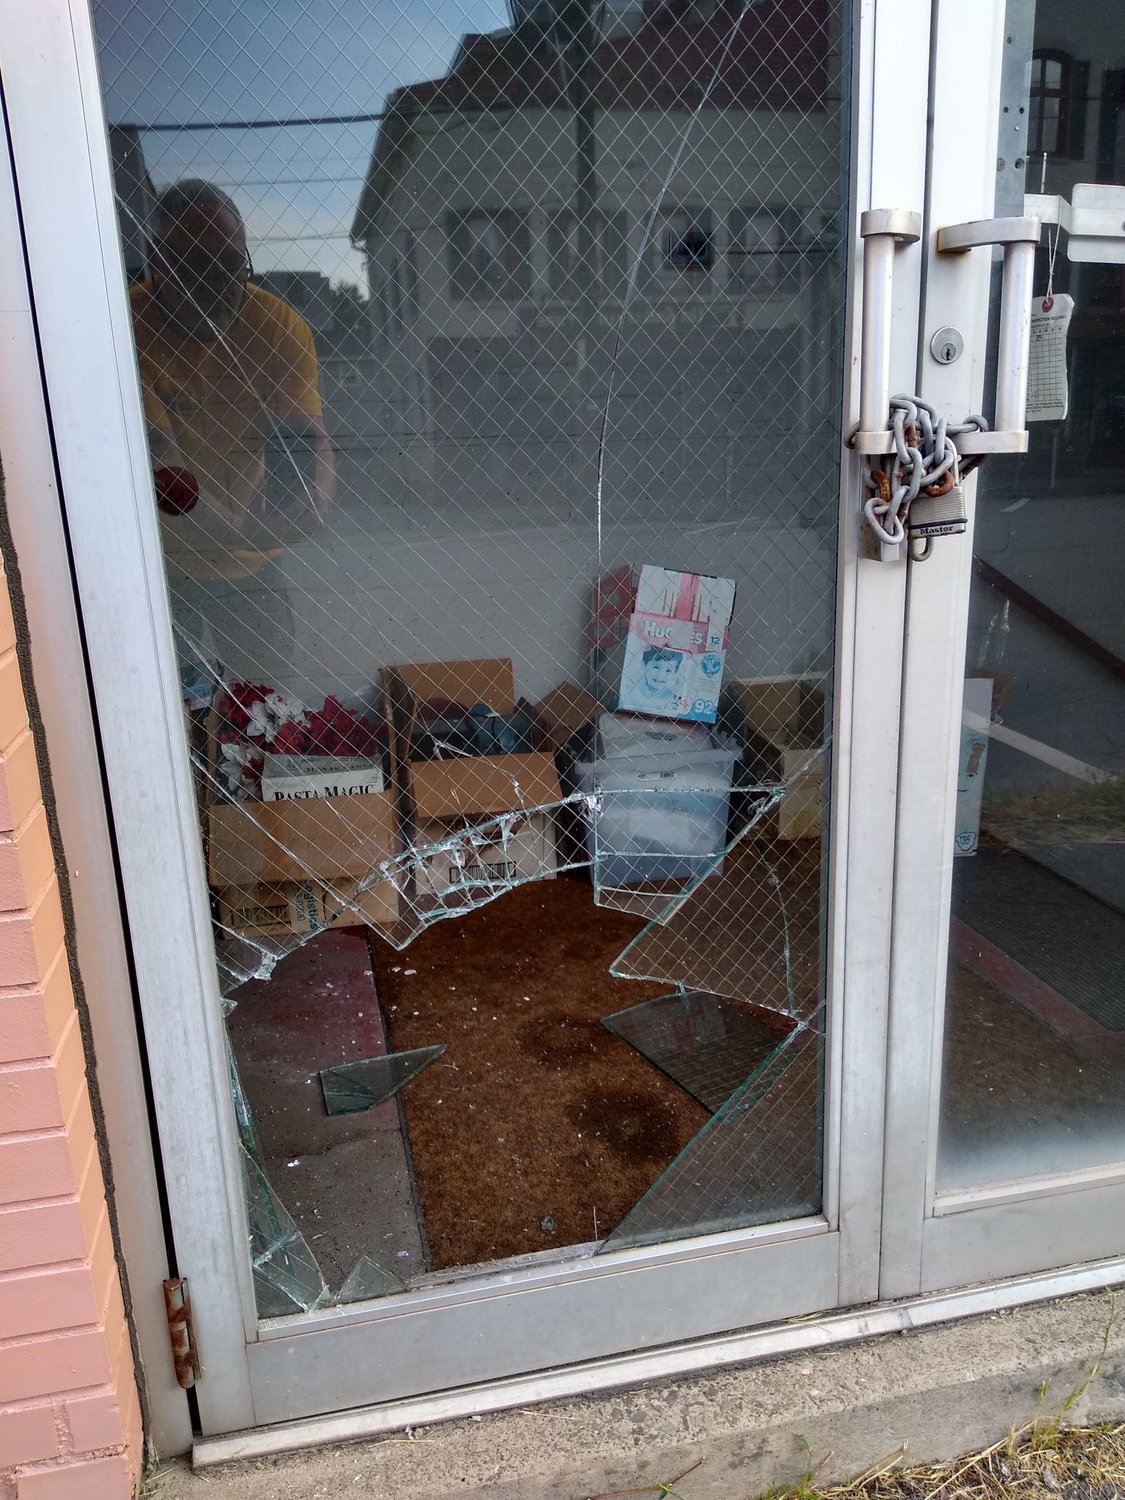 Over Labor Day weekend, somebody shattered the glass door on the side of Mommy and Me Consignments in Honesdale.